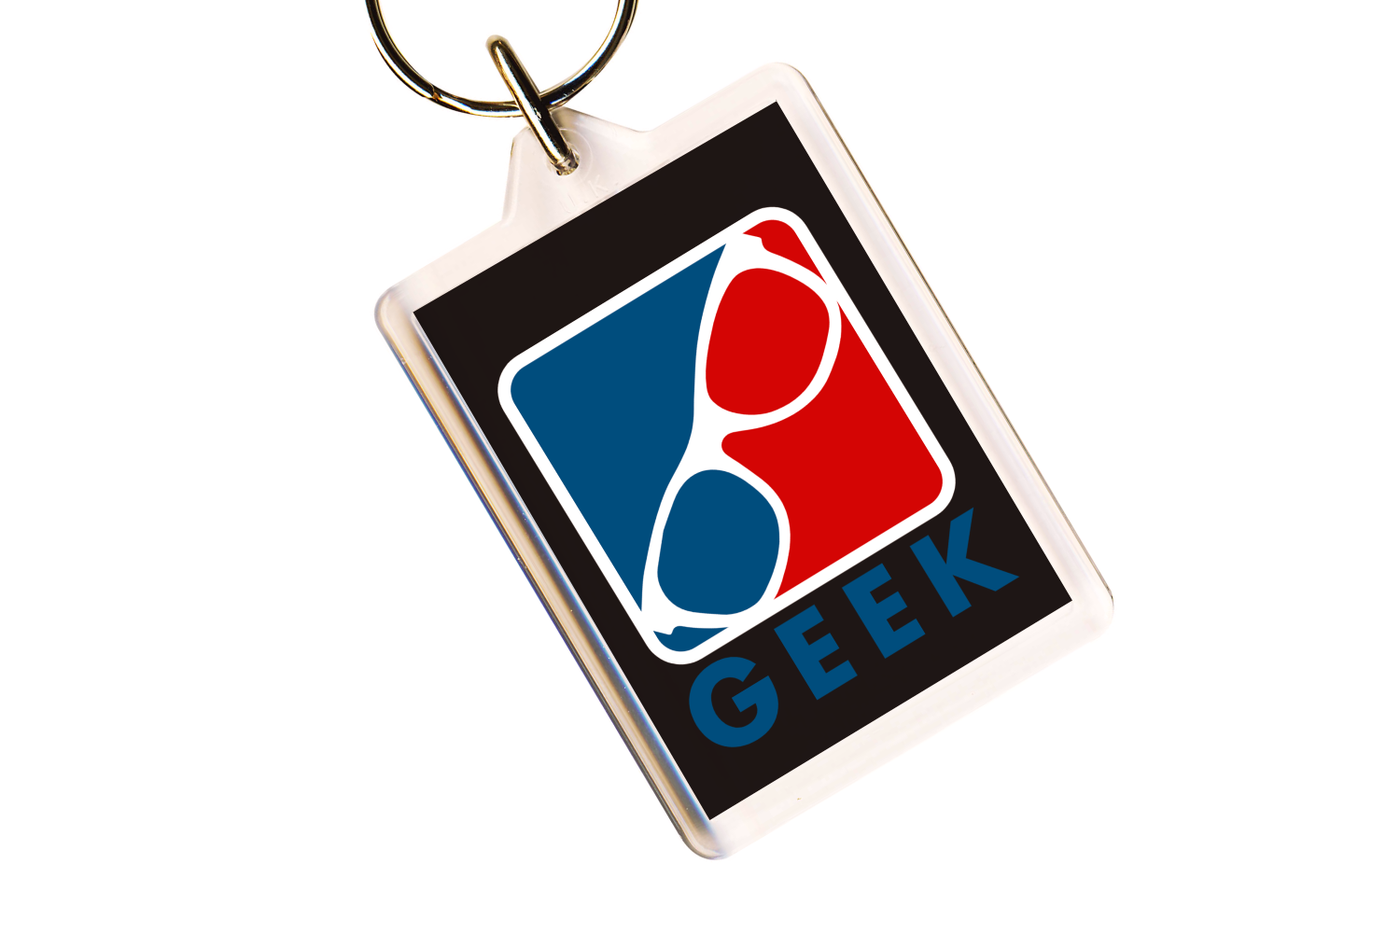 A keychain with a logo resembling pro sports in red and blue with a white pair of geeky glasses. Below it says "GEEK."